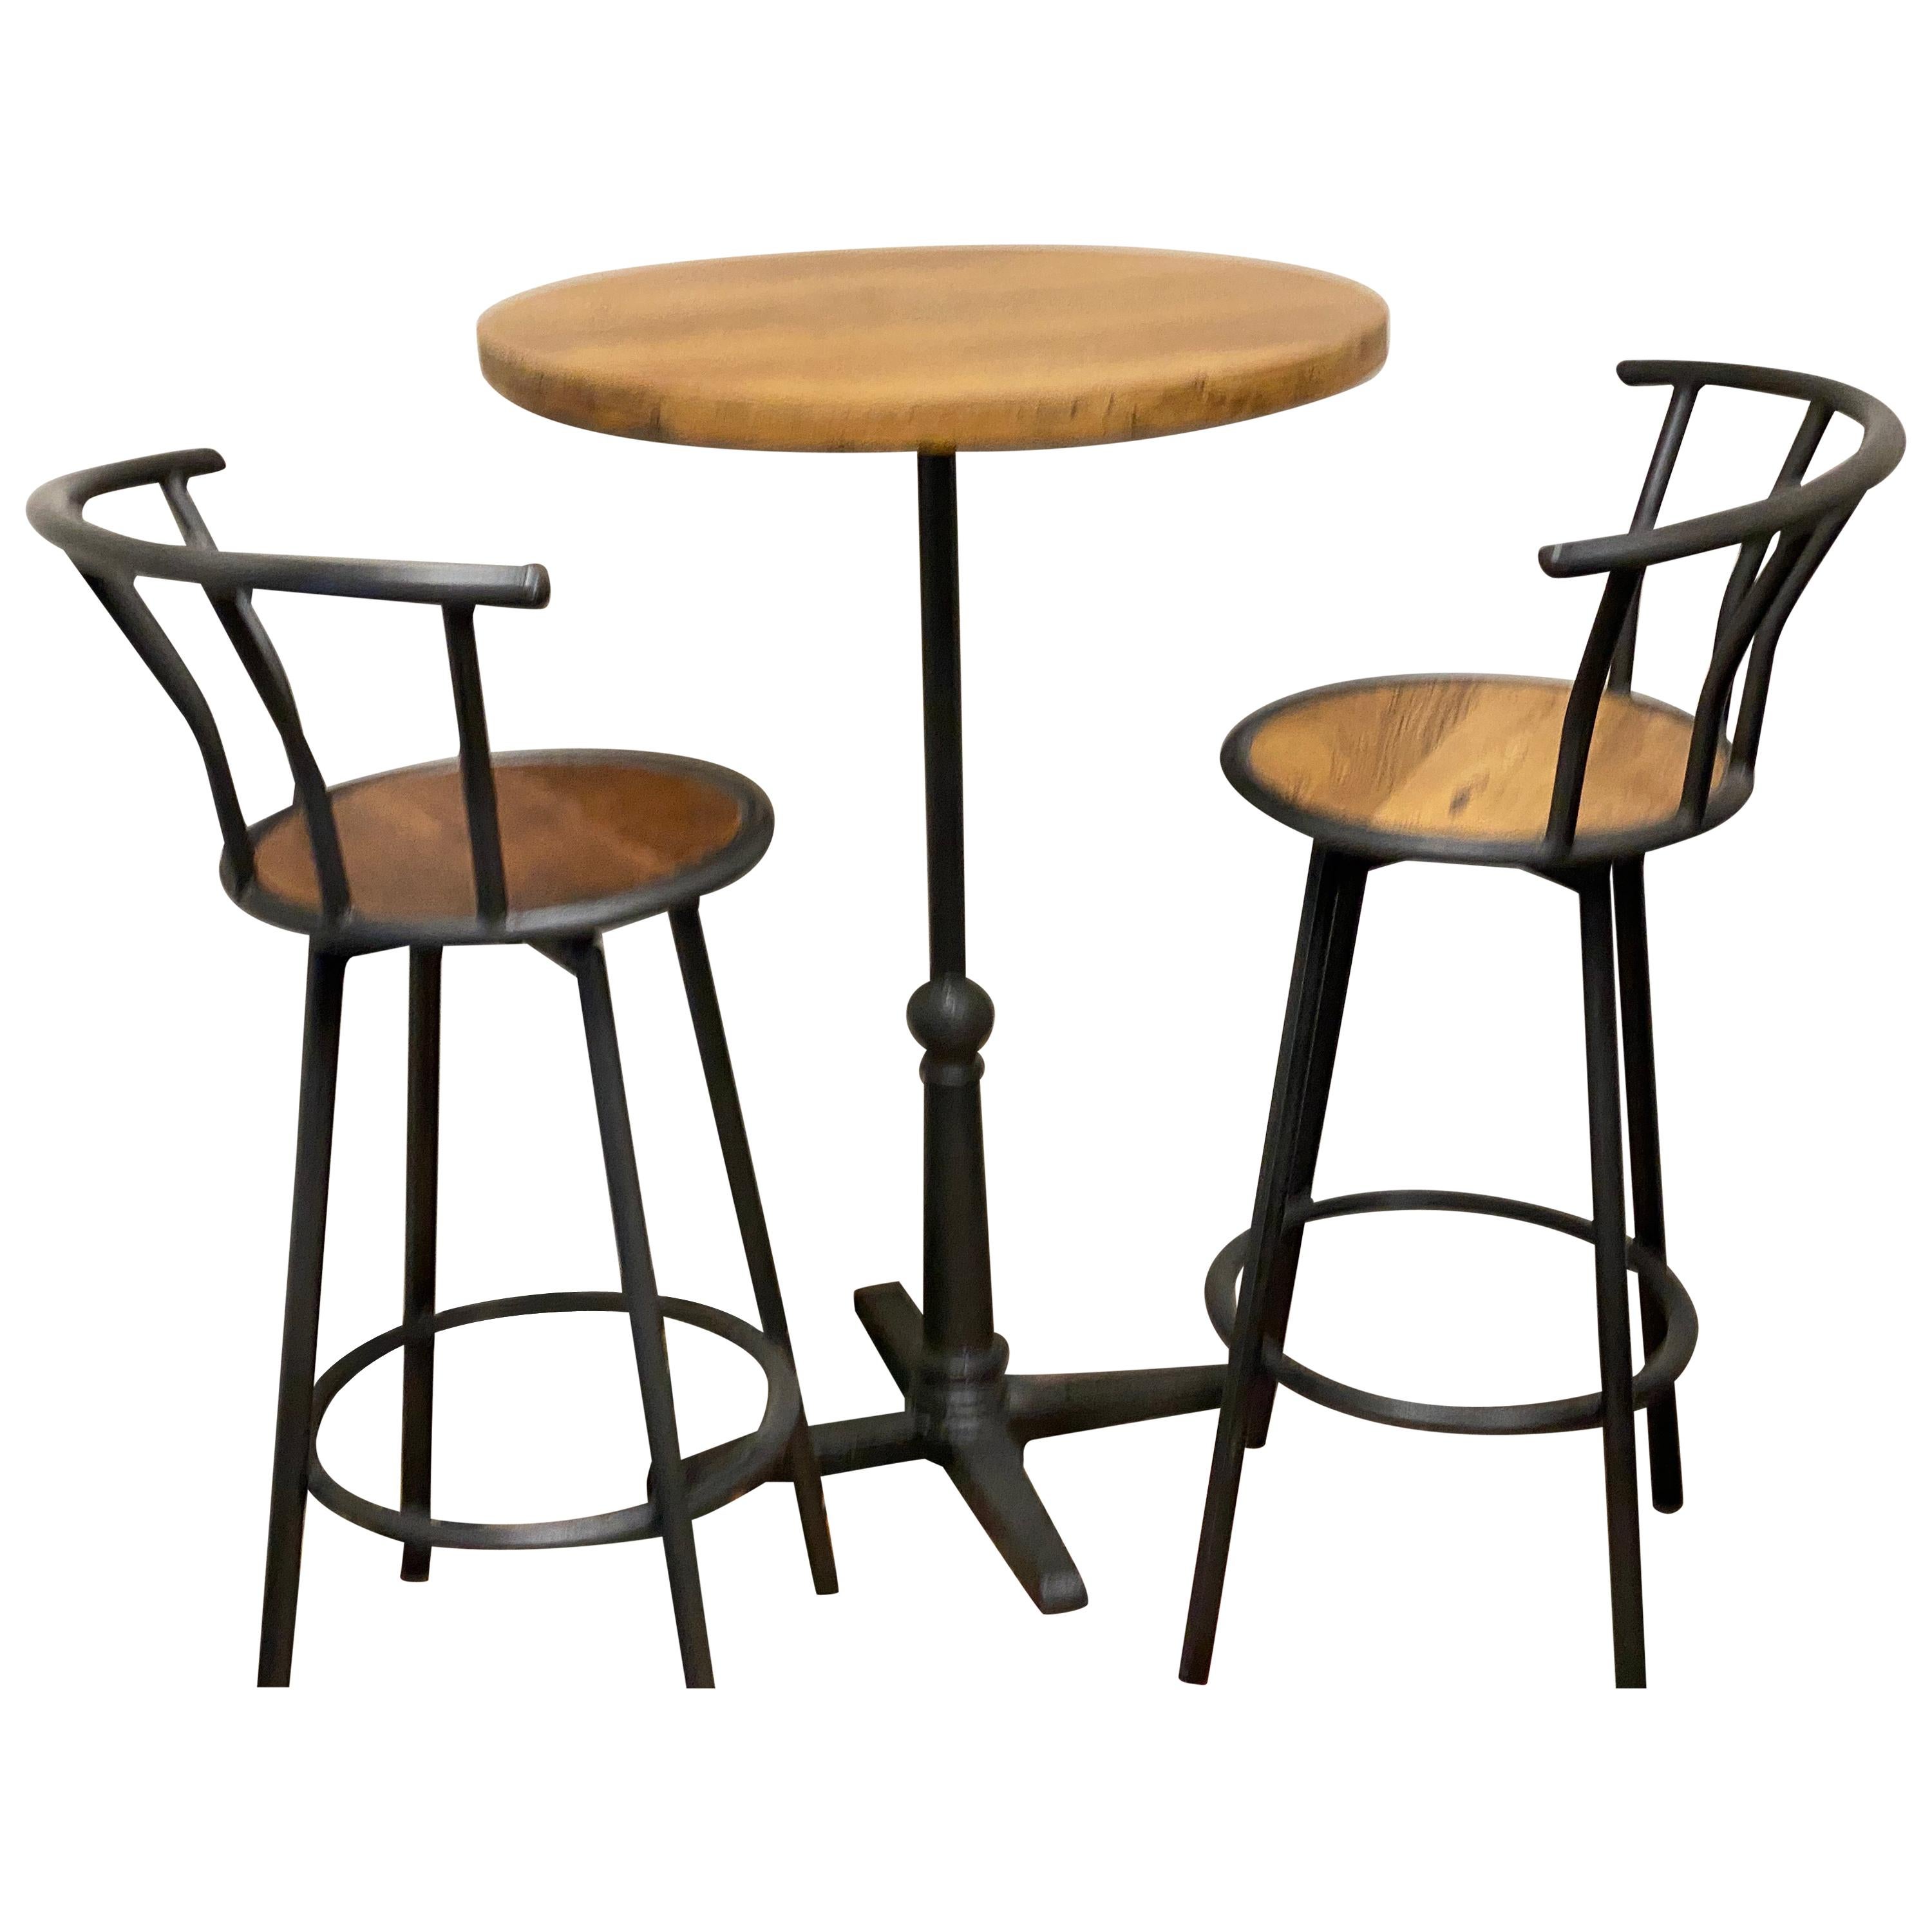 Bar or Patio Table with 2 Bar Height Chairs, Teakwood Table Top, Solid Iron Base For Sale